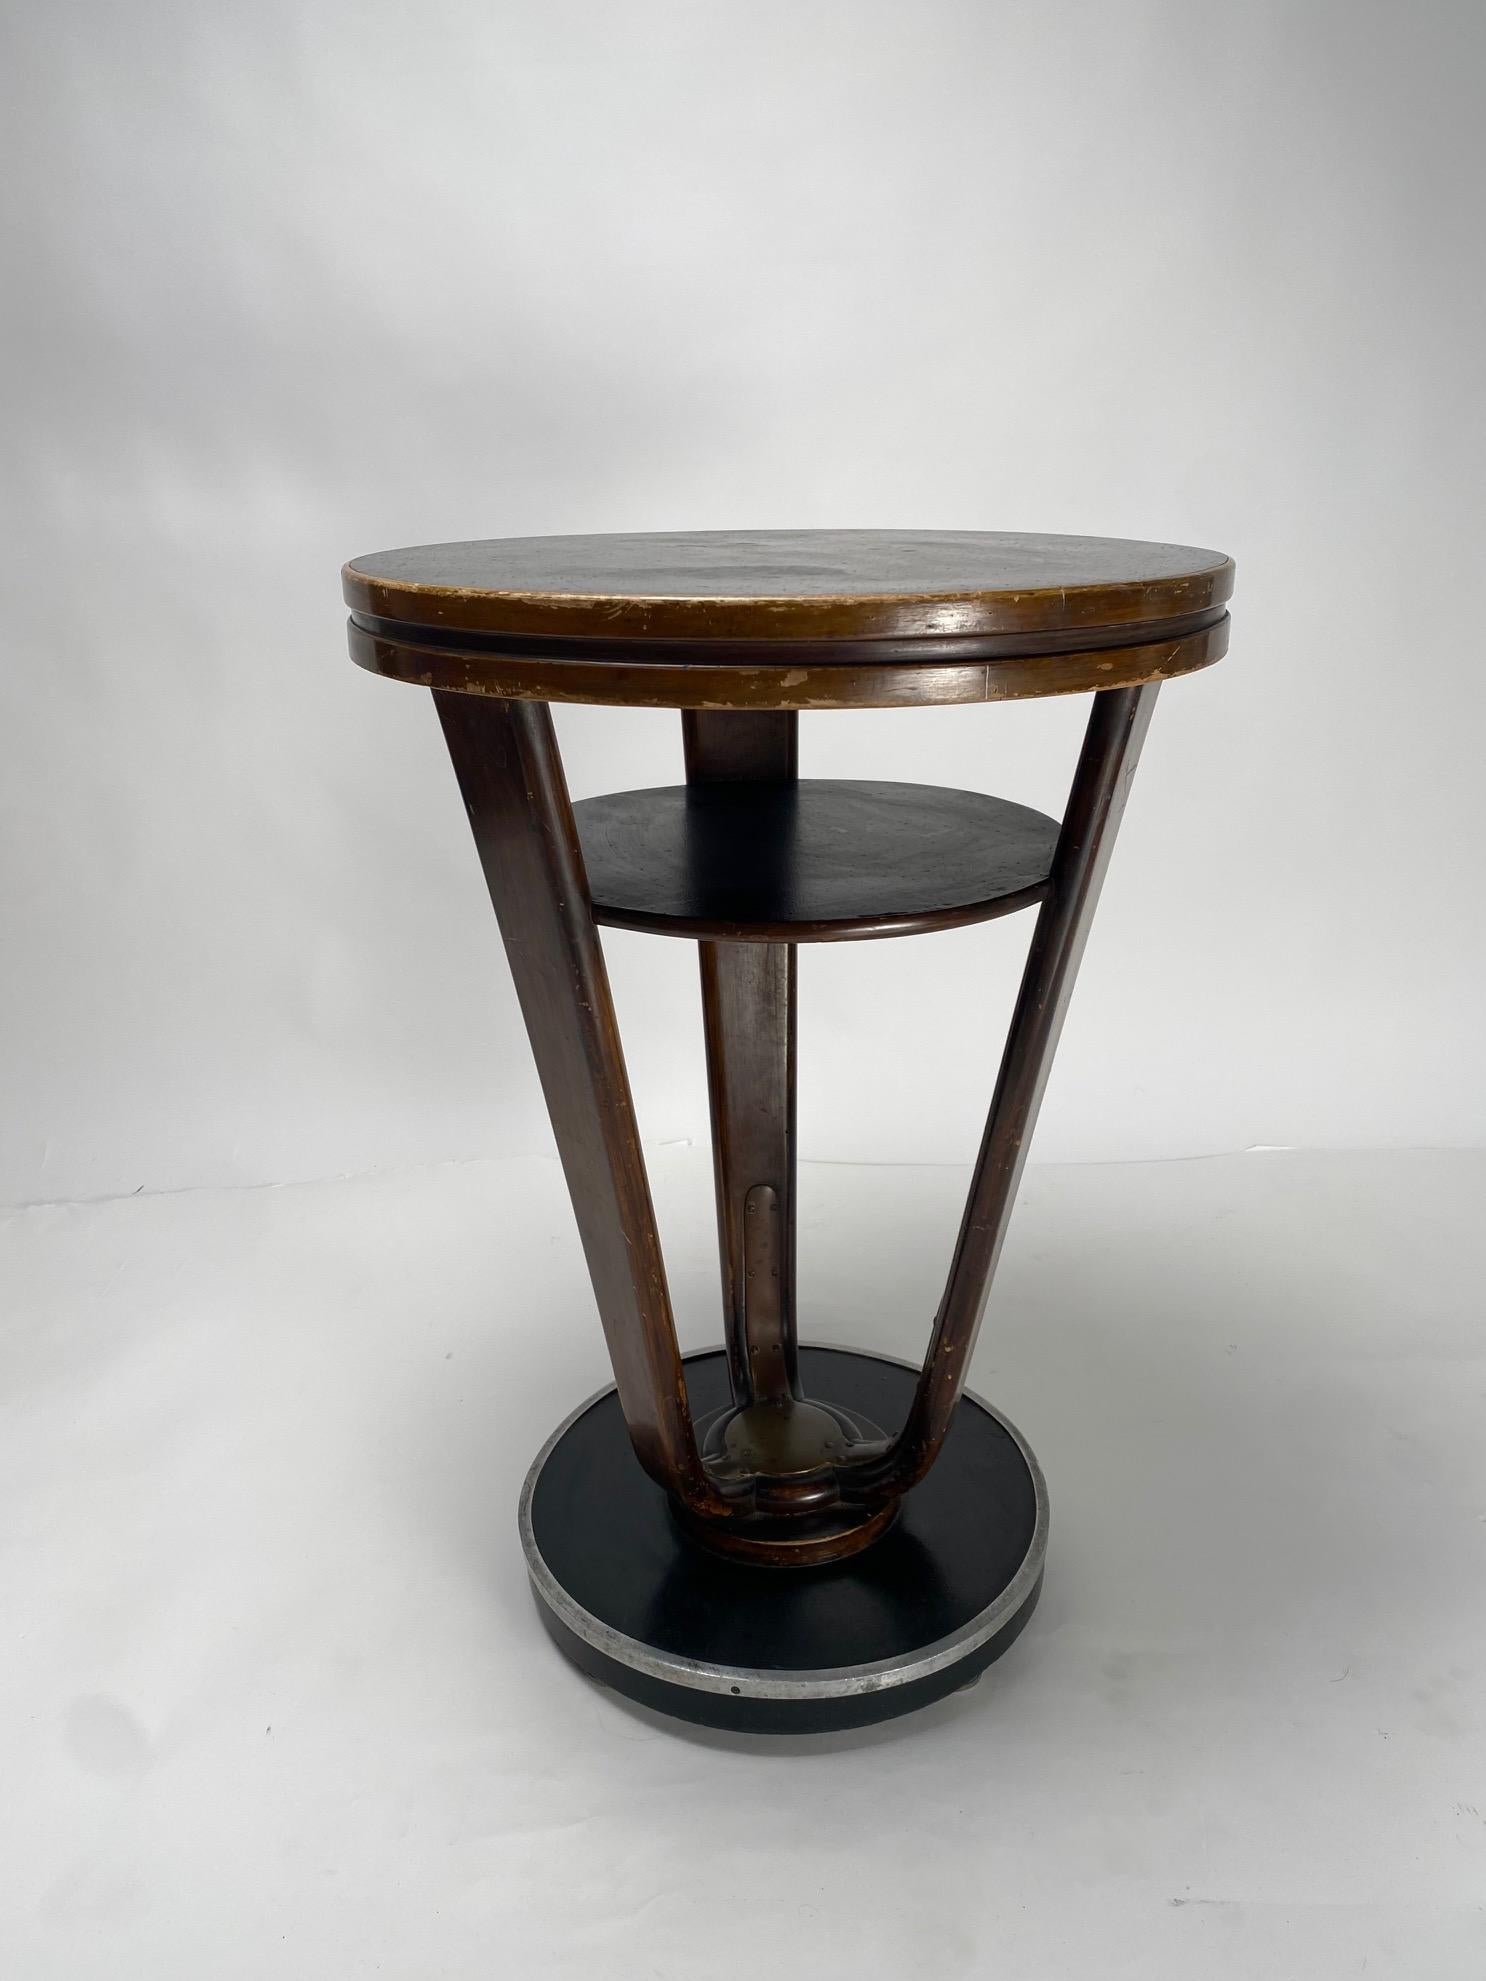 Important Art Deco round coffee table in wood and metal made in Italy in the 1930s.

It is a coffee table referable to the important artistic movement called 